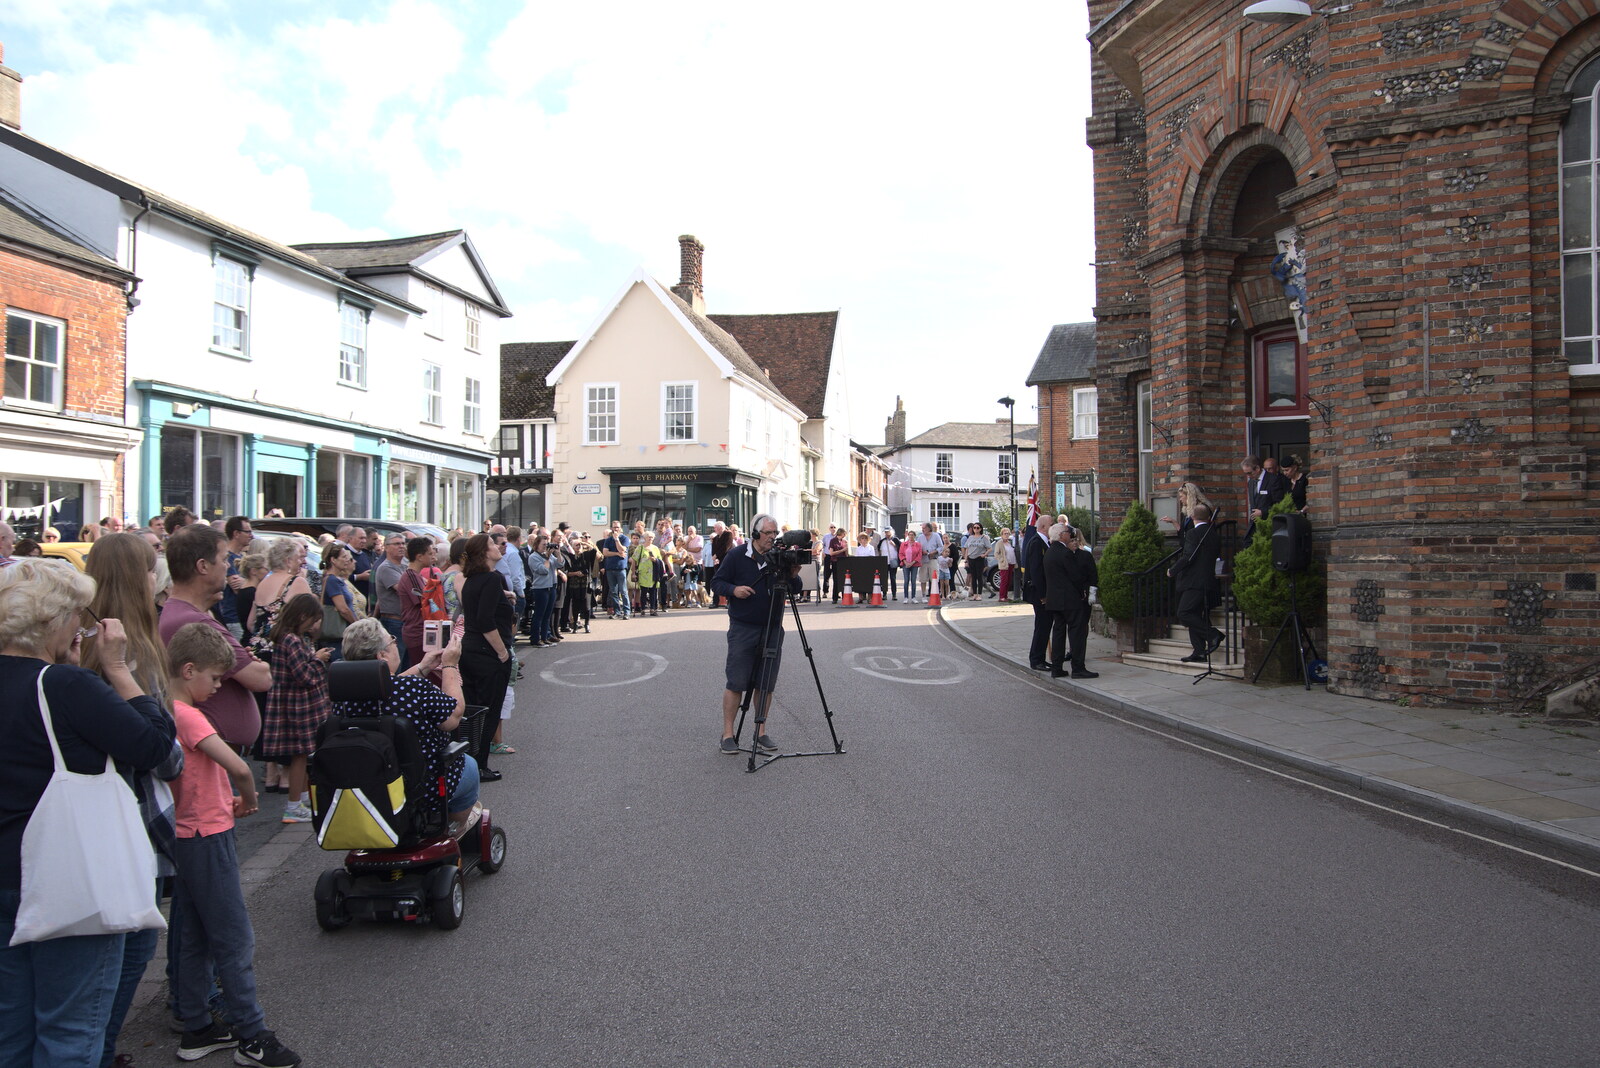 Italian Cars and a Royal Proclamation, Eye, Suffolk - 11th September 2022: Another view past the town hall